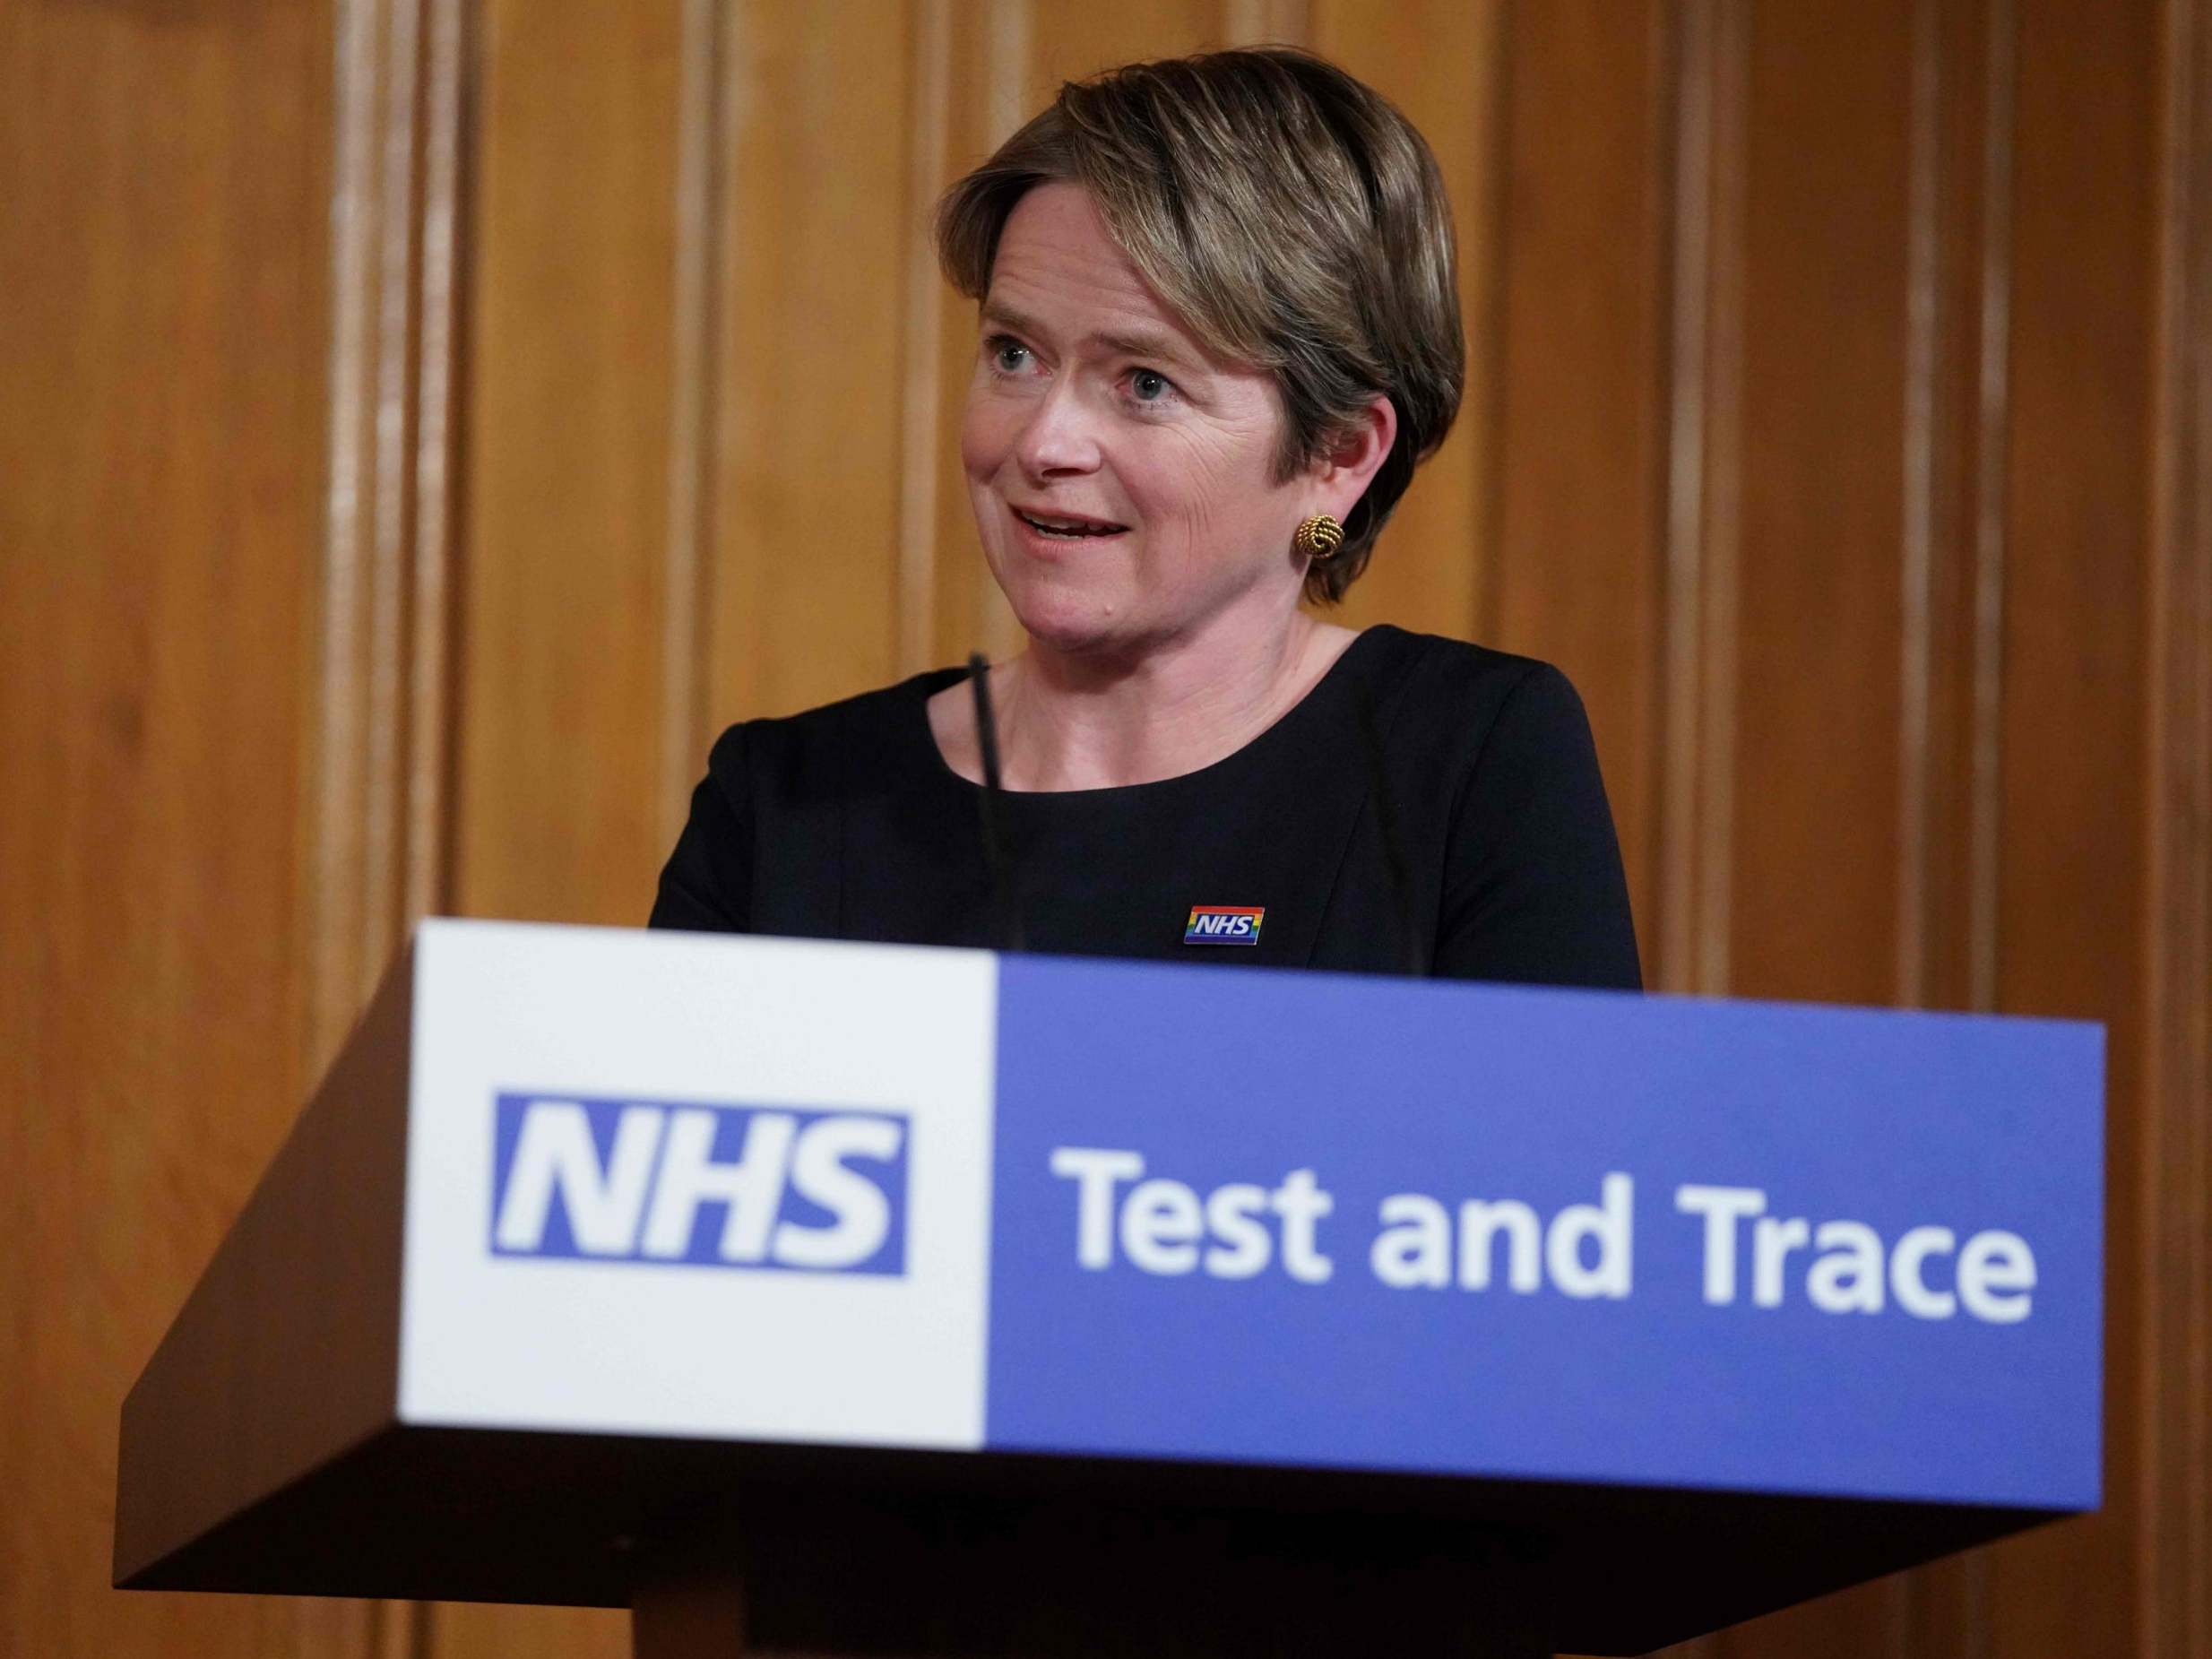 NHS Test and Trace's executive chair, Tory peer Baroness Dido Harding